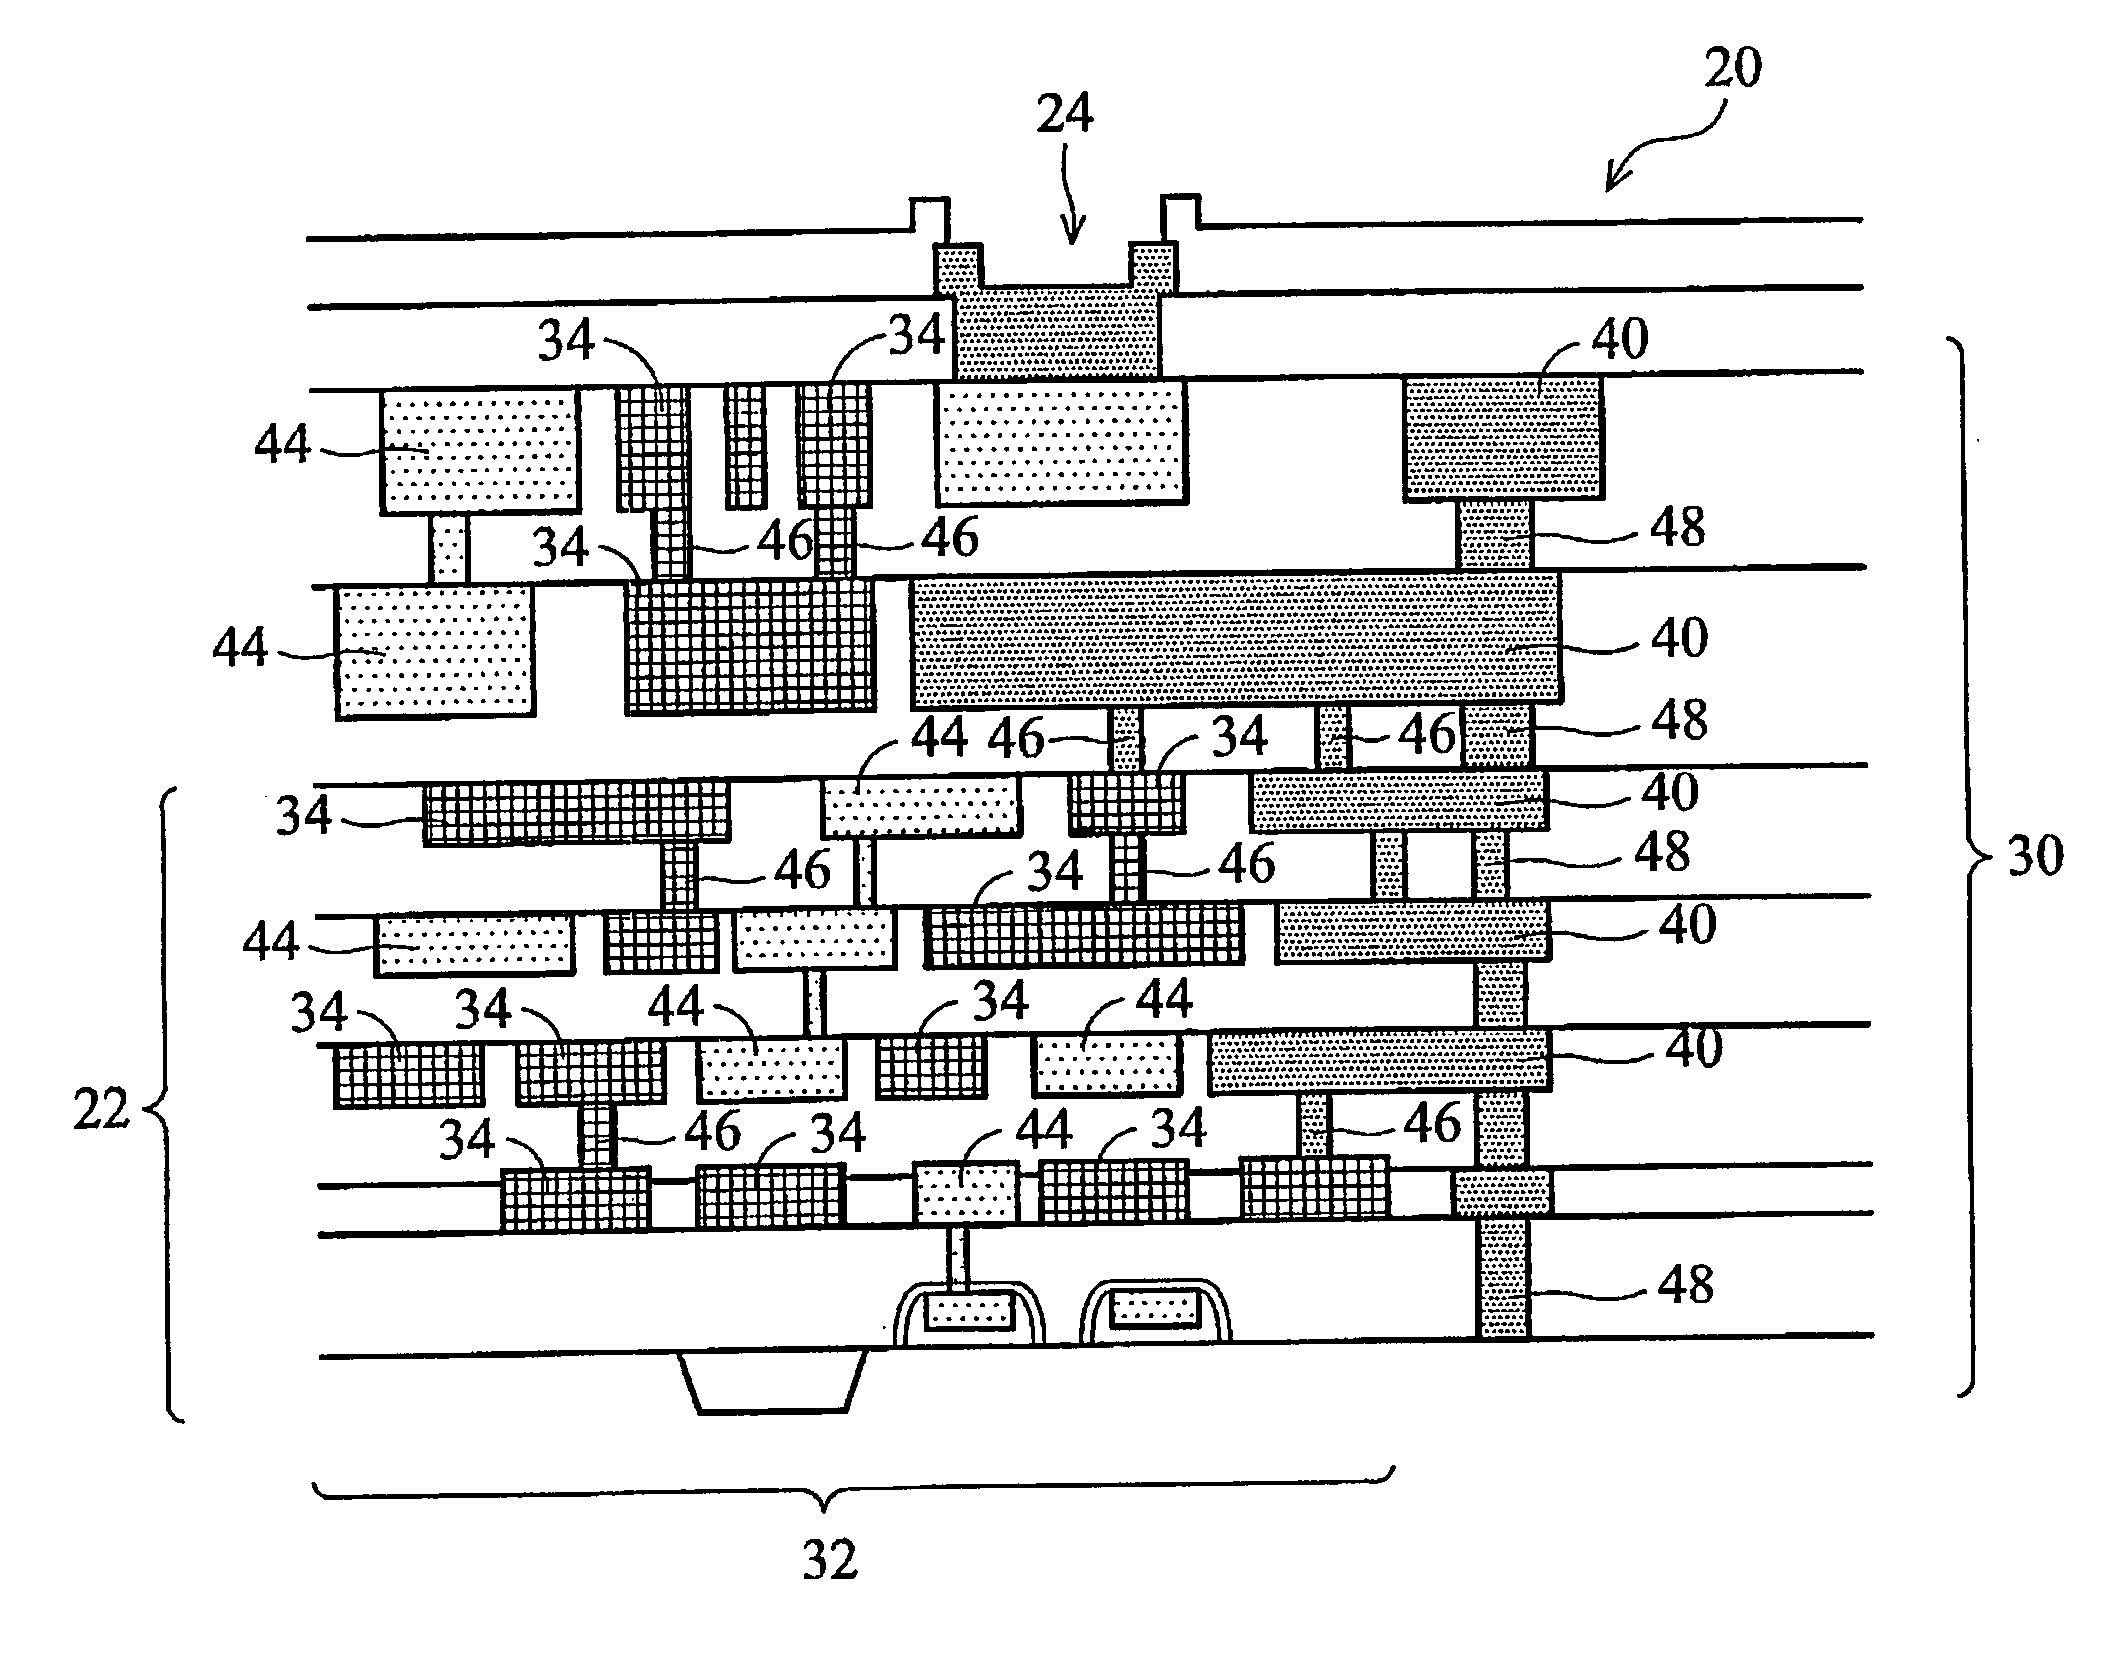 Dummy structures extending from seal ring into active circuit area of integrated circuit chip